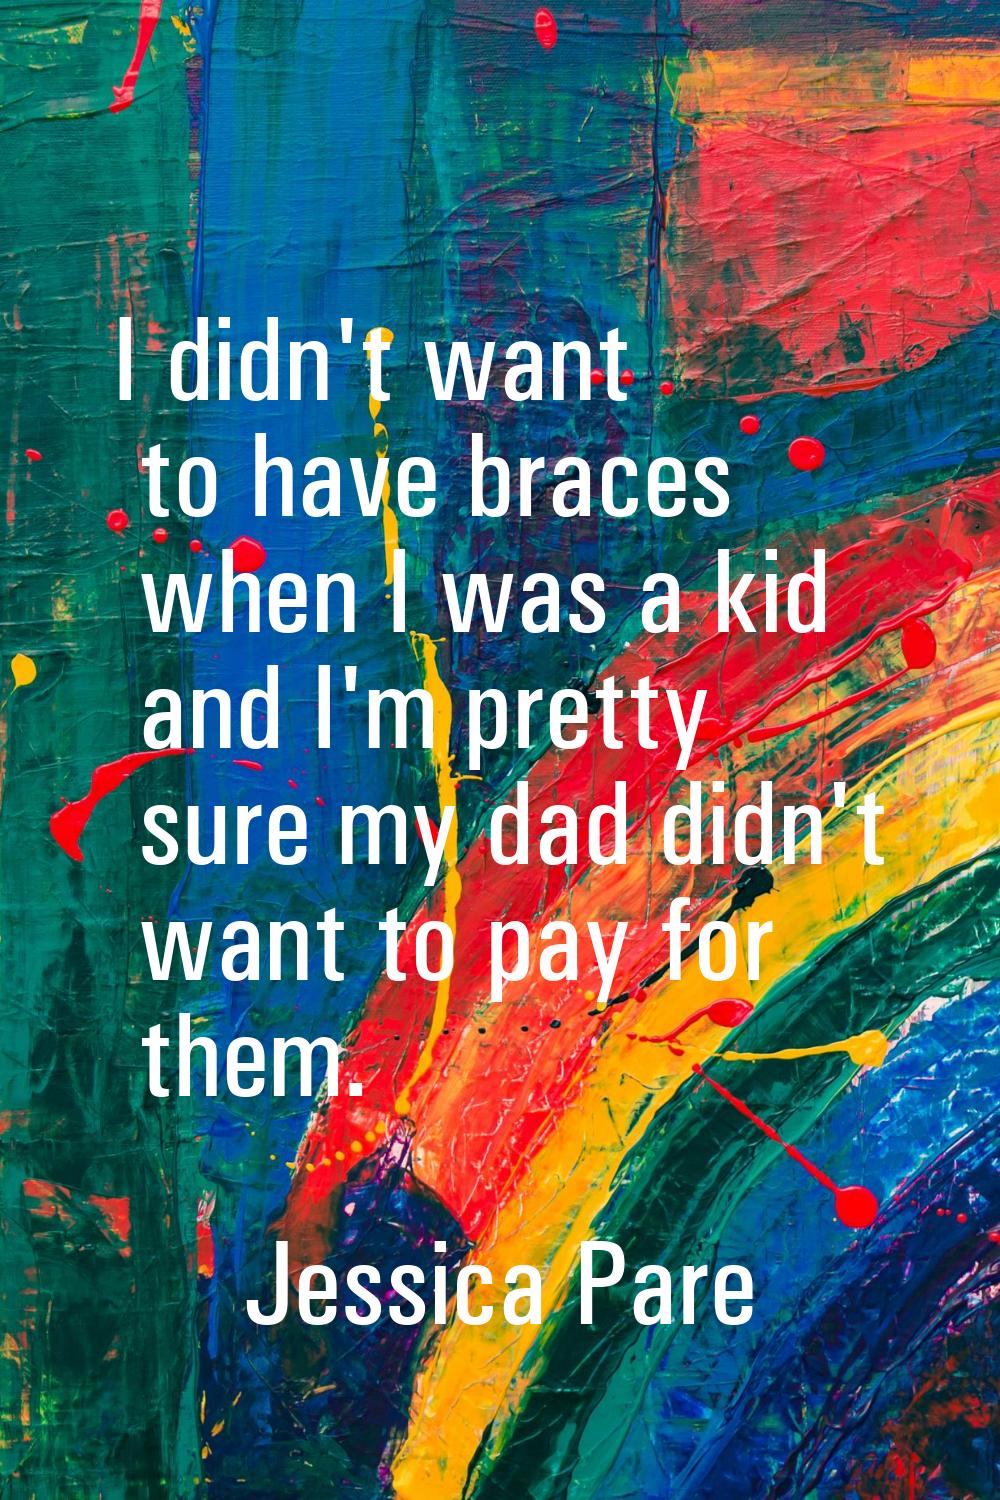 I didn't want to have braces when I was a kid and I'm pretty sure my dad didn't want to pay for the